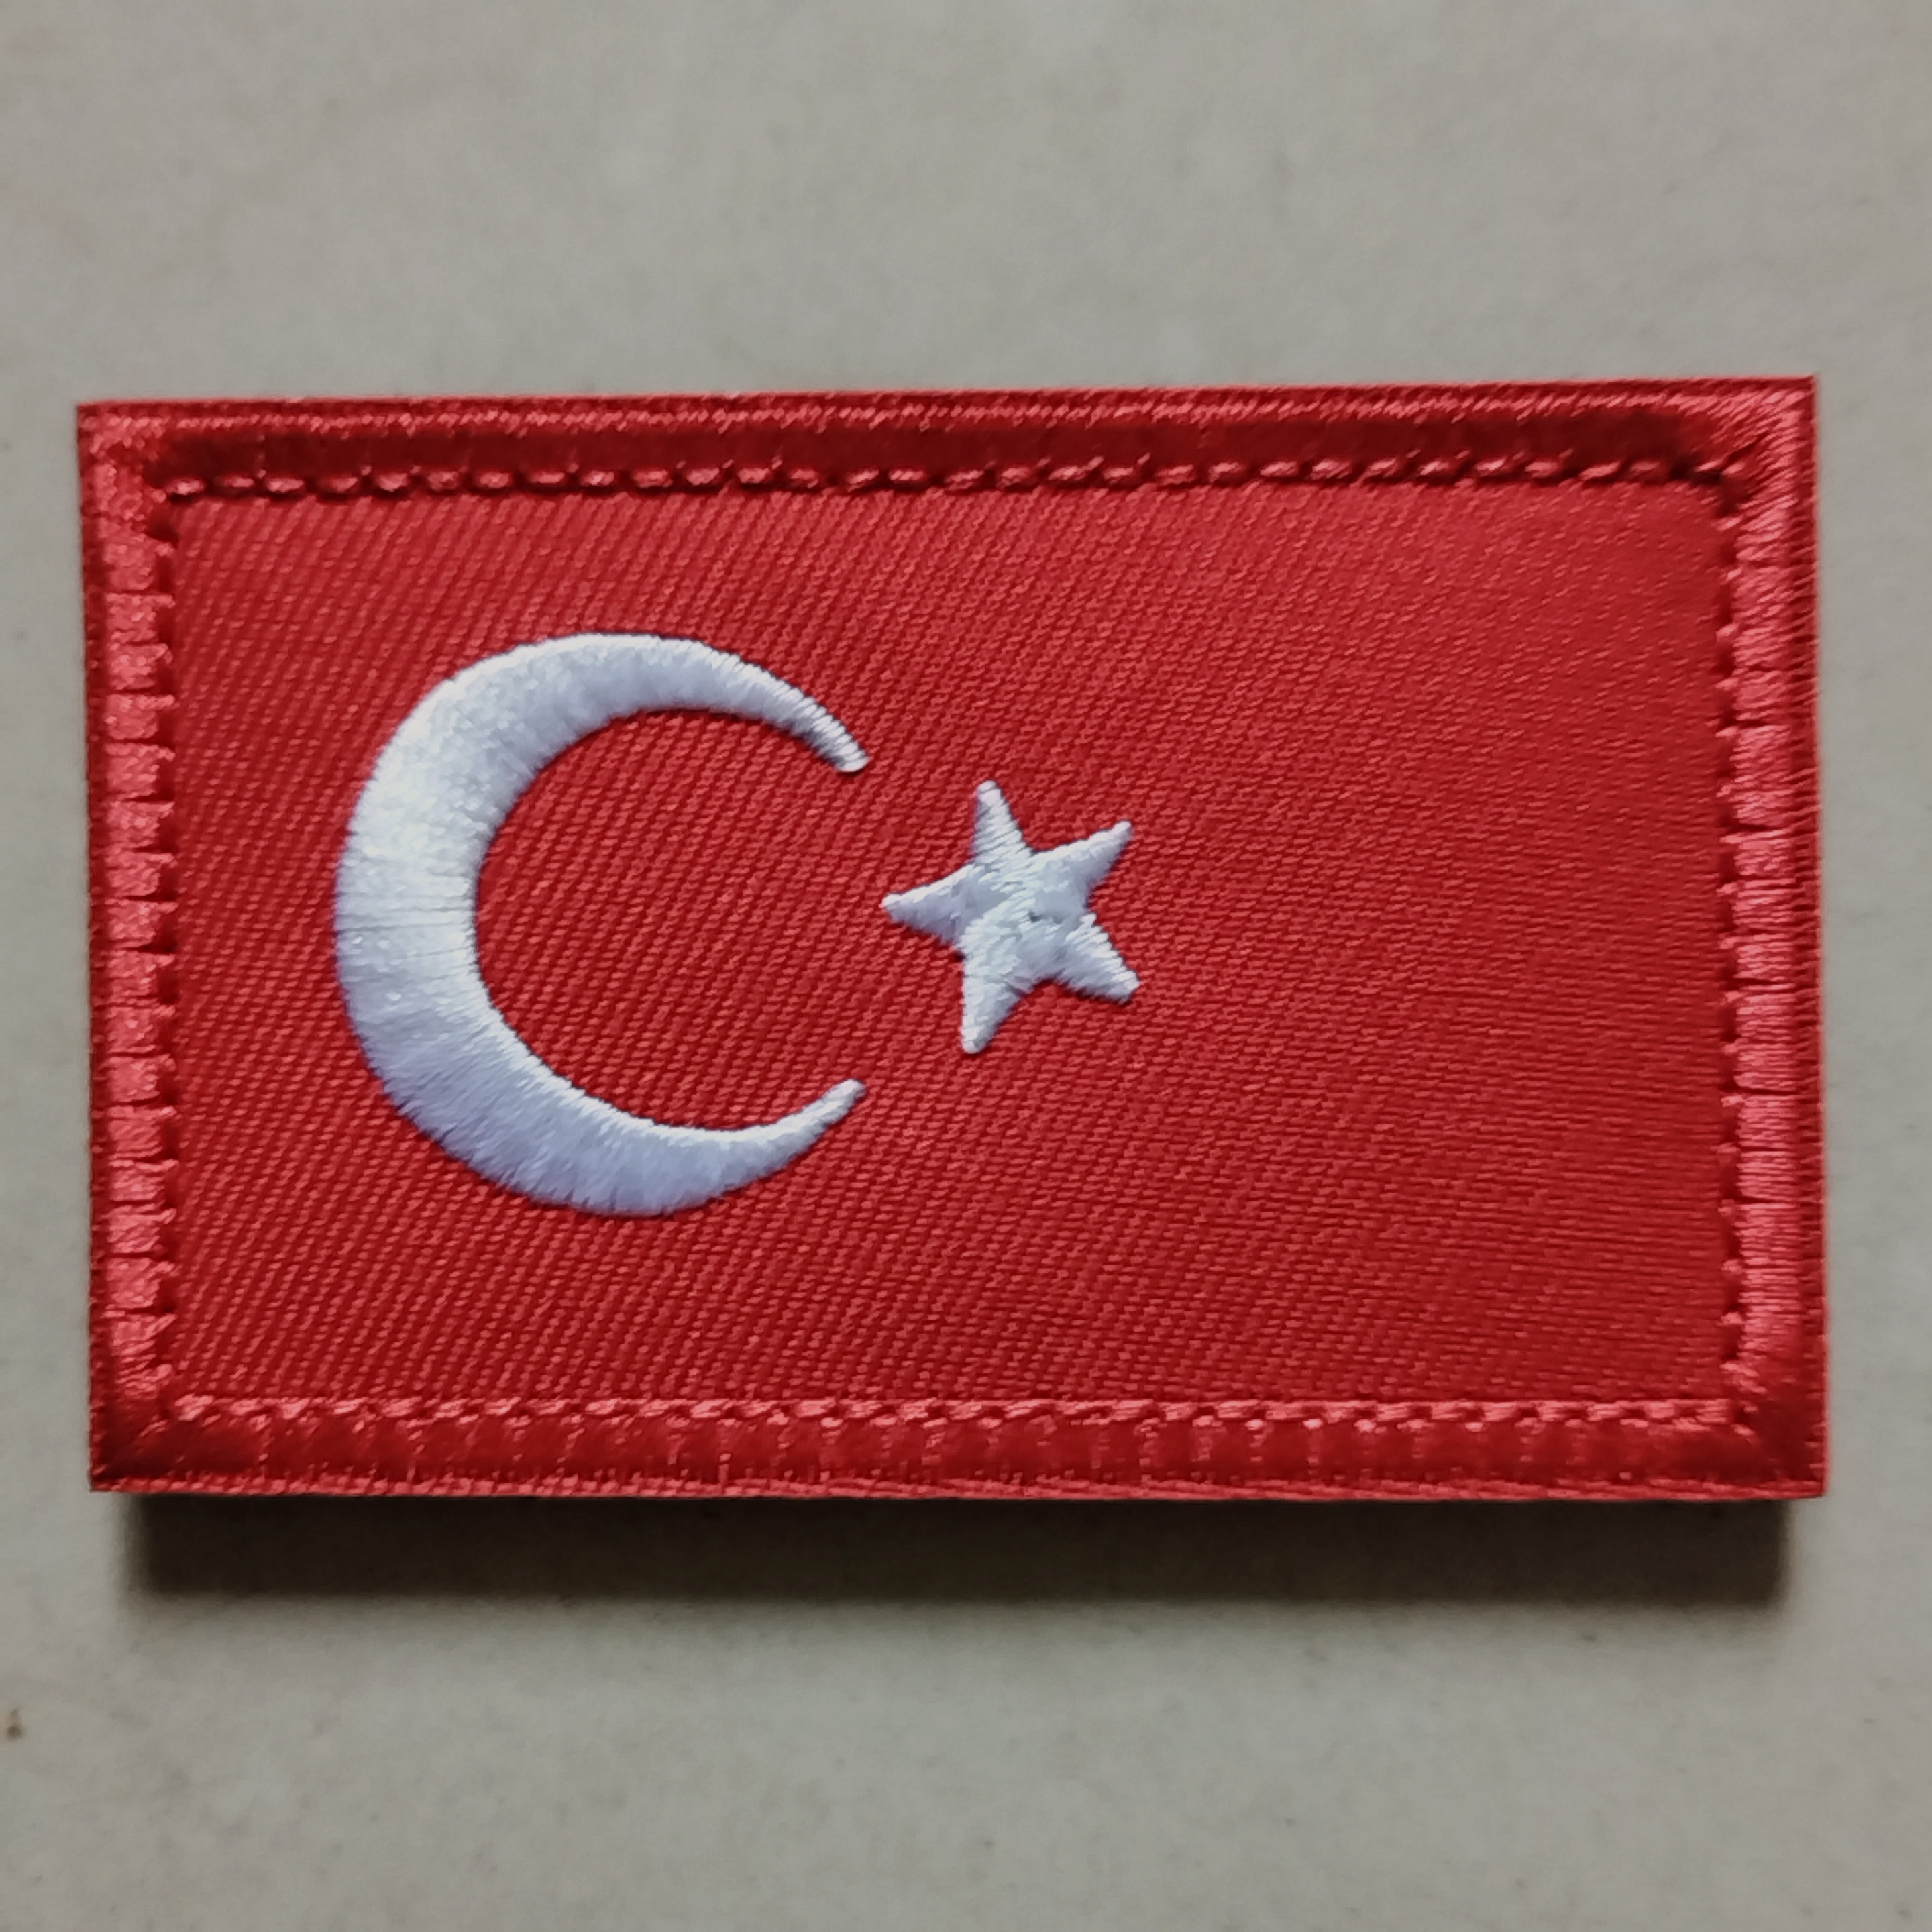 

1pc Embroidered Turkish Flag Patch With Hook & Loop Fastener - White & Red Tactical Emblem Appliqué For Backpacks, Clothing, Coats, Caps, Bags, Vests, Jackets